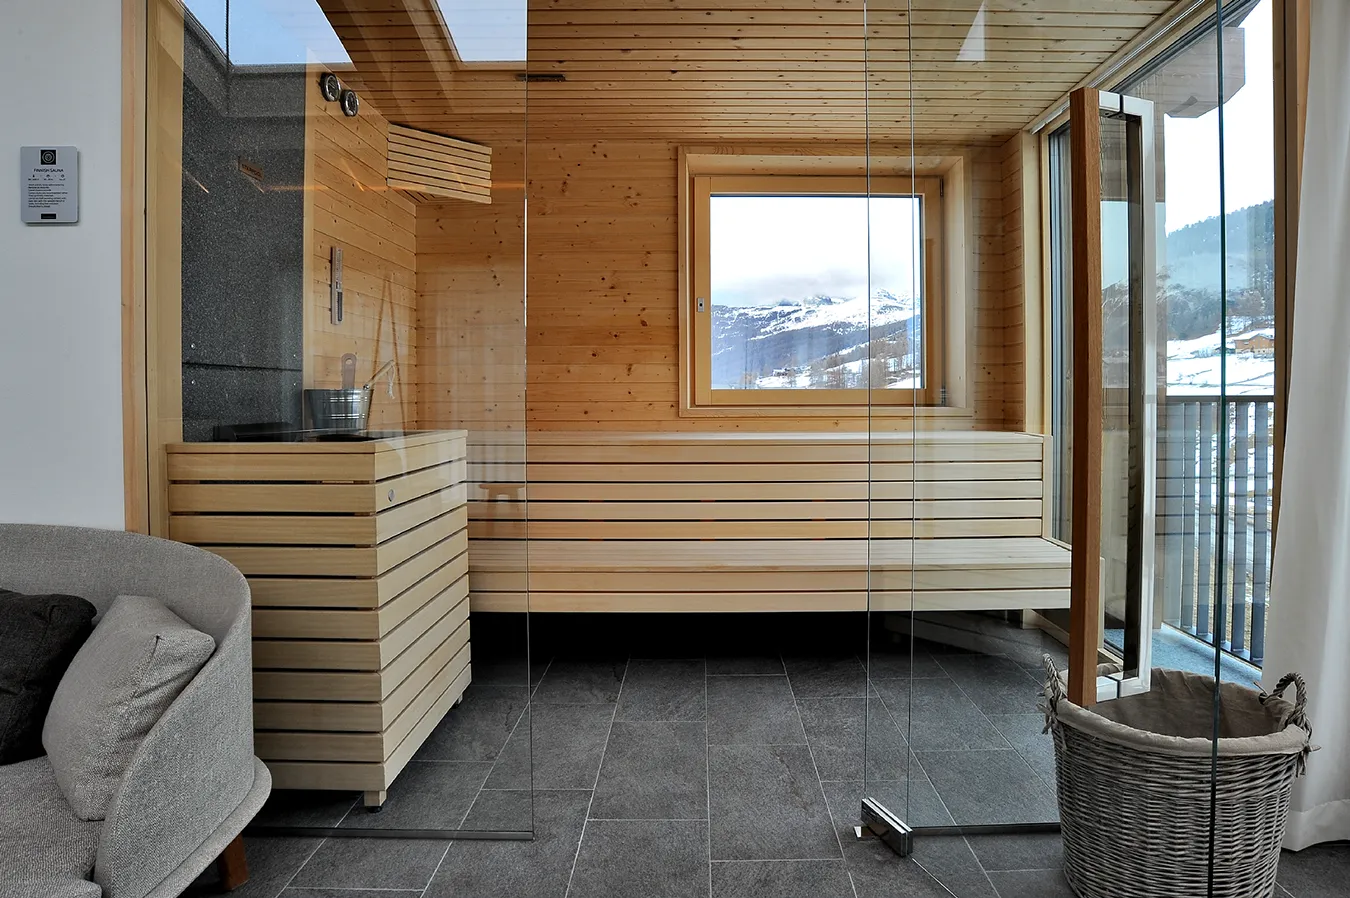 Elegant wooden sauna room with stone-effect porcelain stoneware flooring from the Percorsi Extra collection in Pietra di Combe color, offering mountain views through the window.